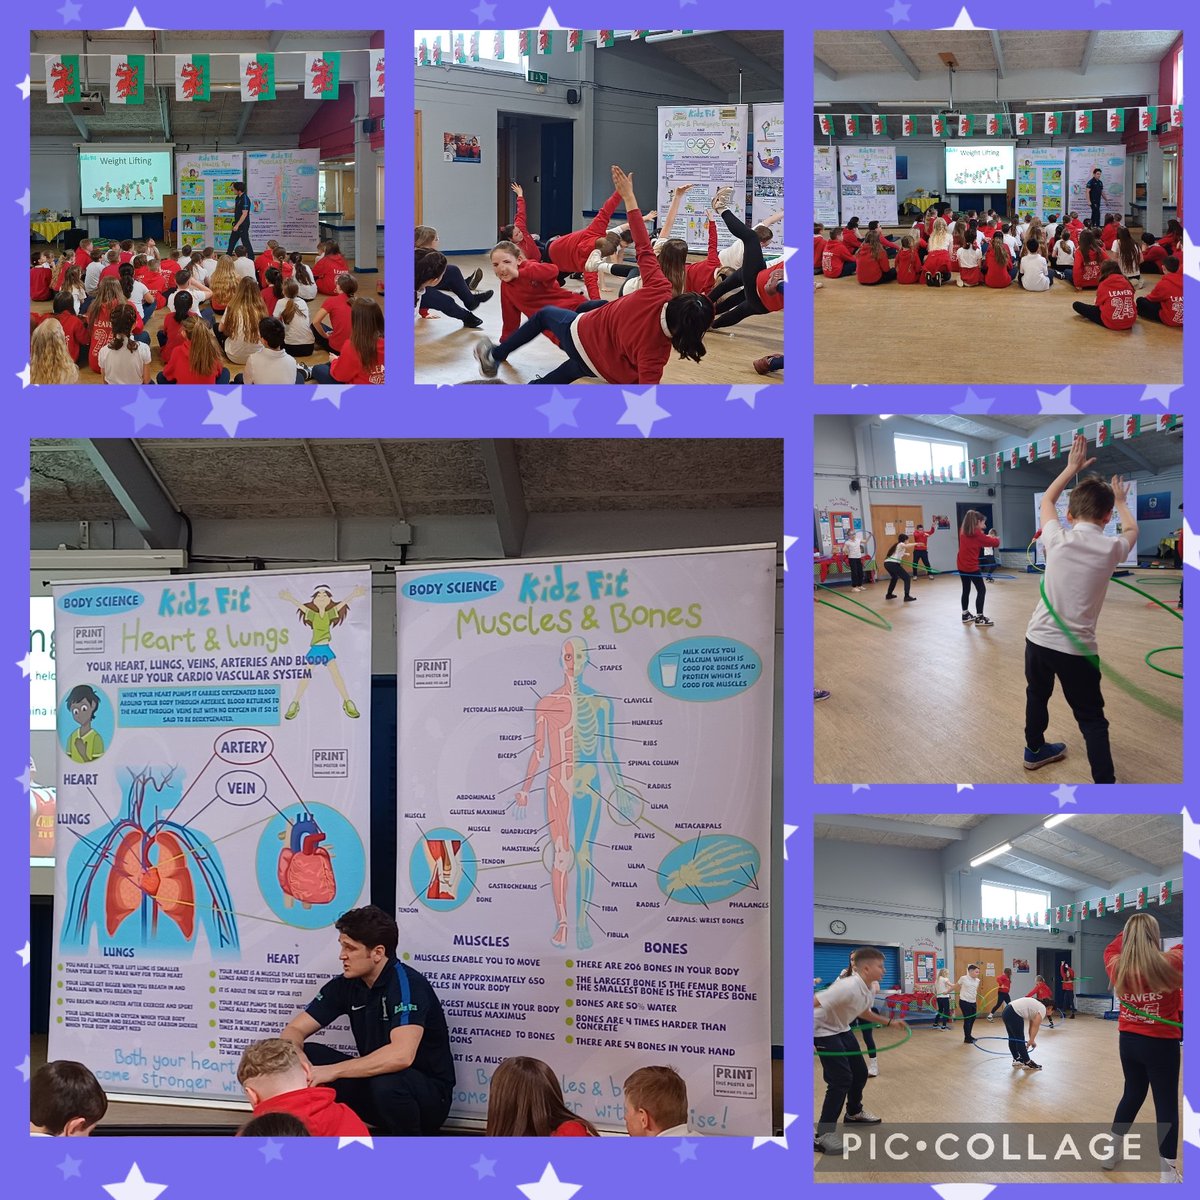 Dosbarth Caerdydd and Dosbarth Oystermouth had a fantastic time learning about the Olympics and how our bodies work. We all had a good workout and displayed our skills. Diolch @KidzFit1